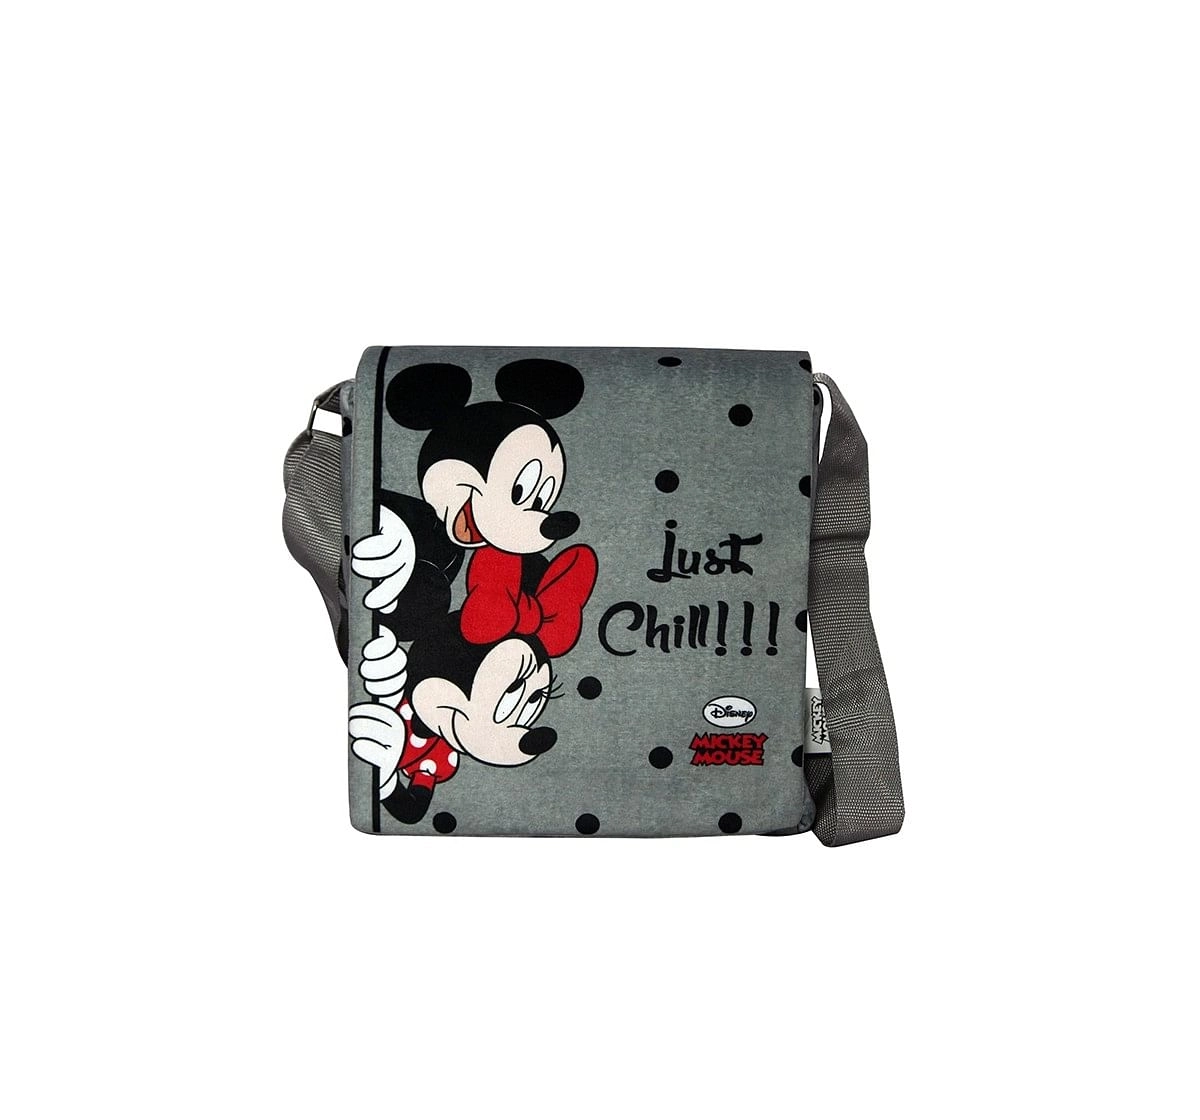 Disney Happiness Zipper Closure Mickey Mouse Printed Sling Bag_Grey_Free Size Plush Accessories for Kids age 12M+ - 27.94 Cm 